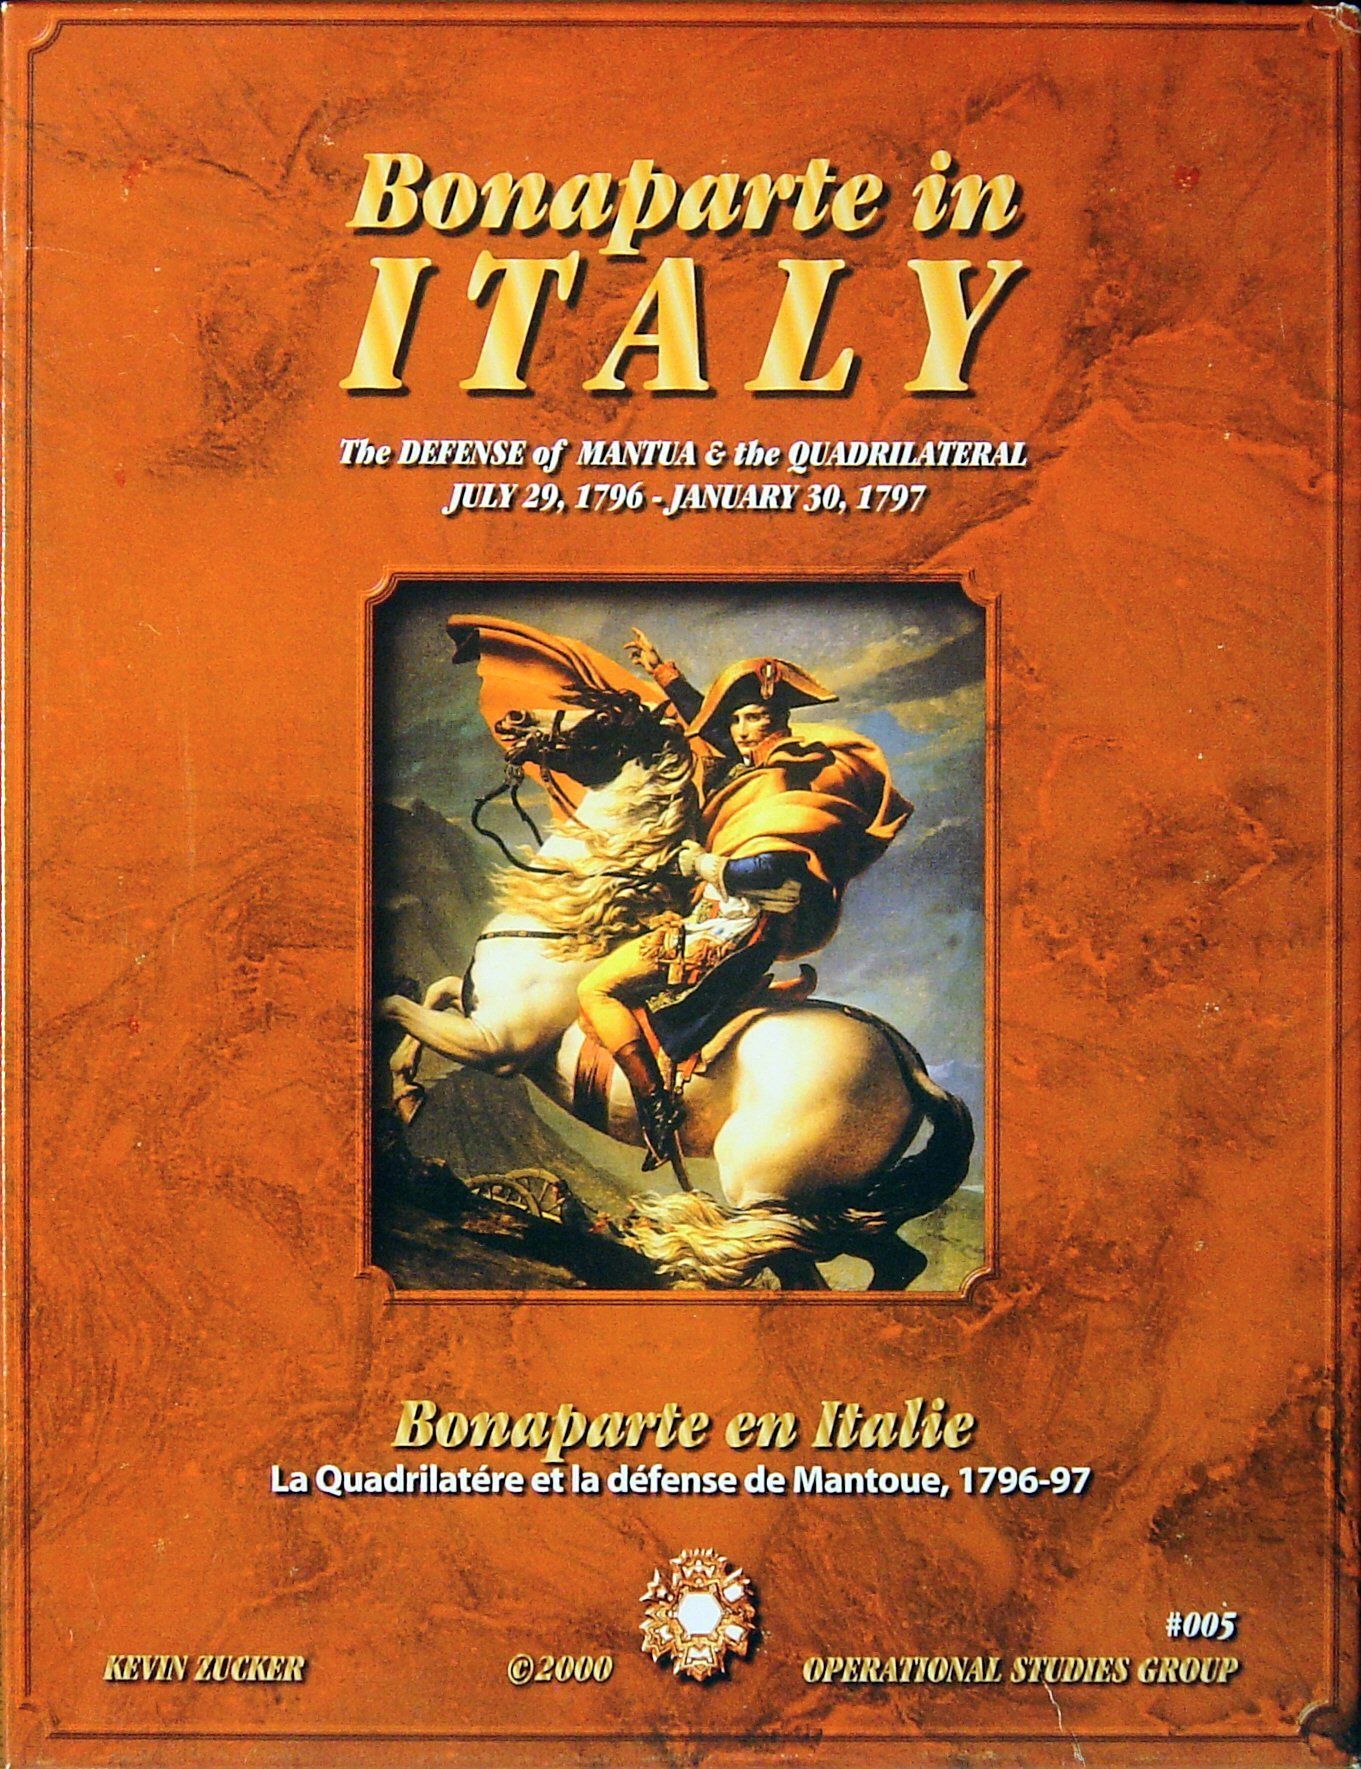 Bonaparte in Italy (Second Edition): The Defense of Mantua and the Quadrilateral, July 29, 1796 - January 30, 1797